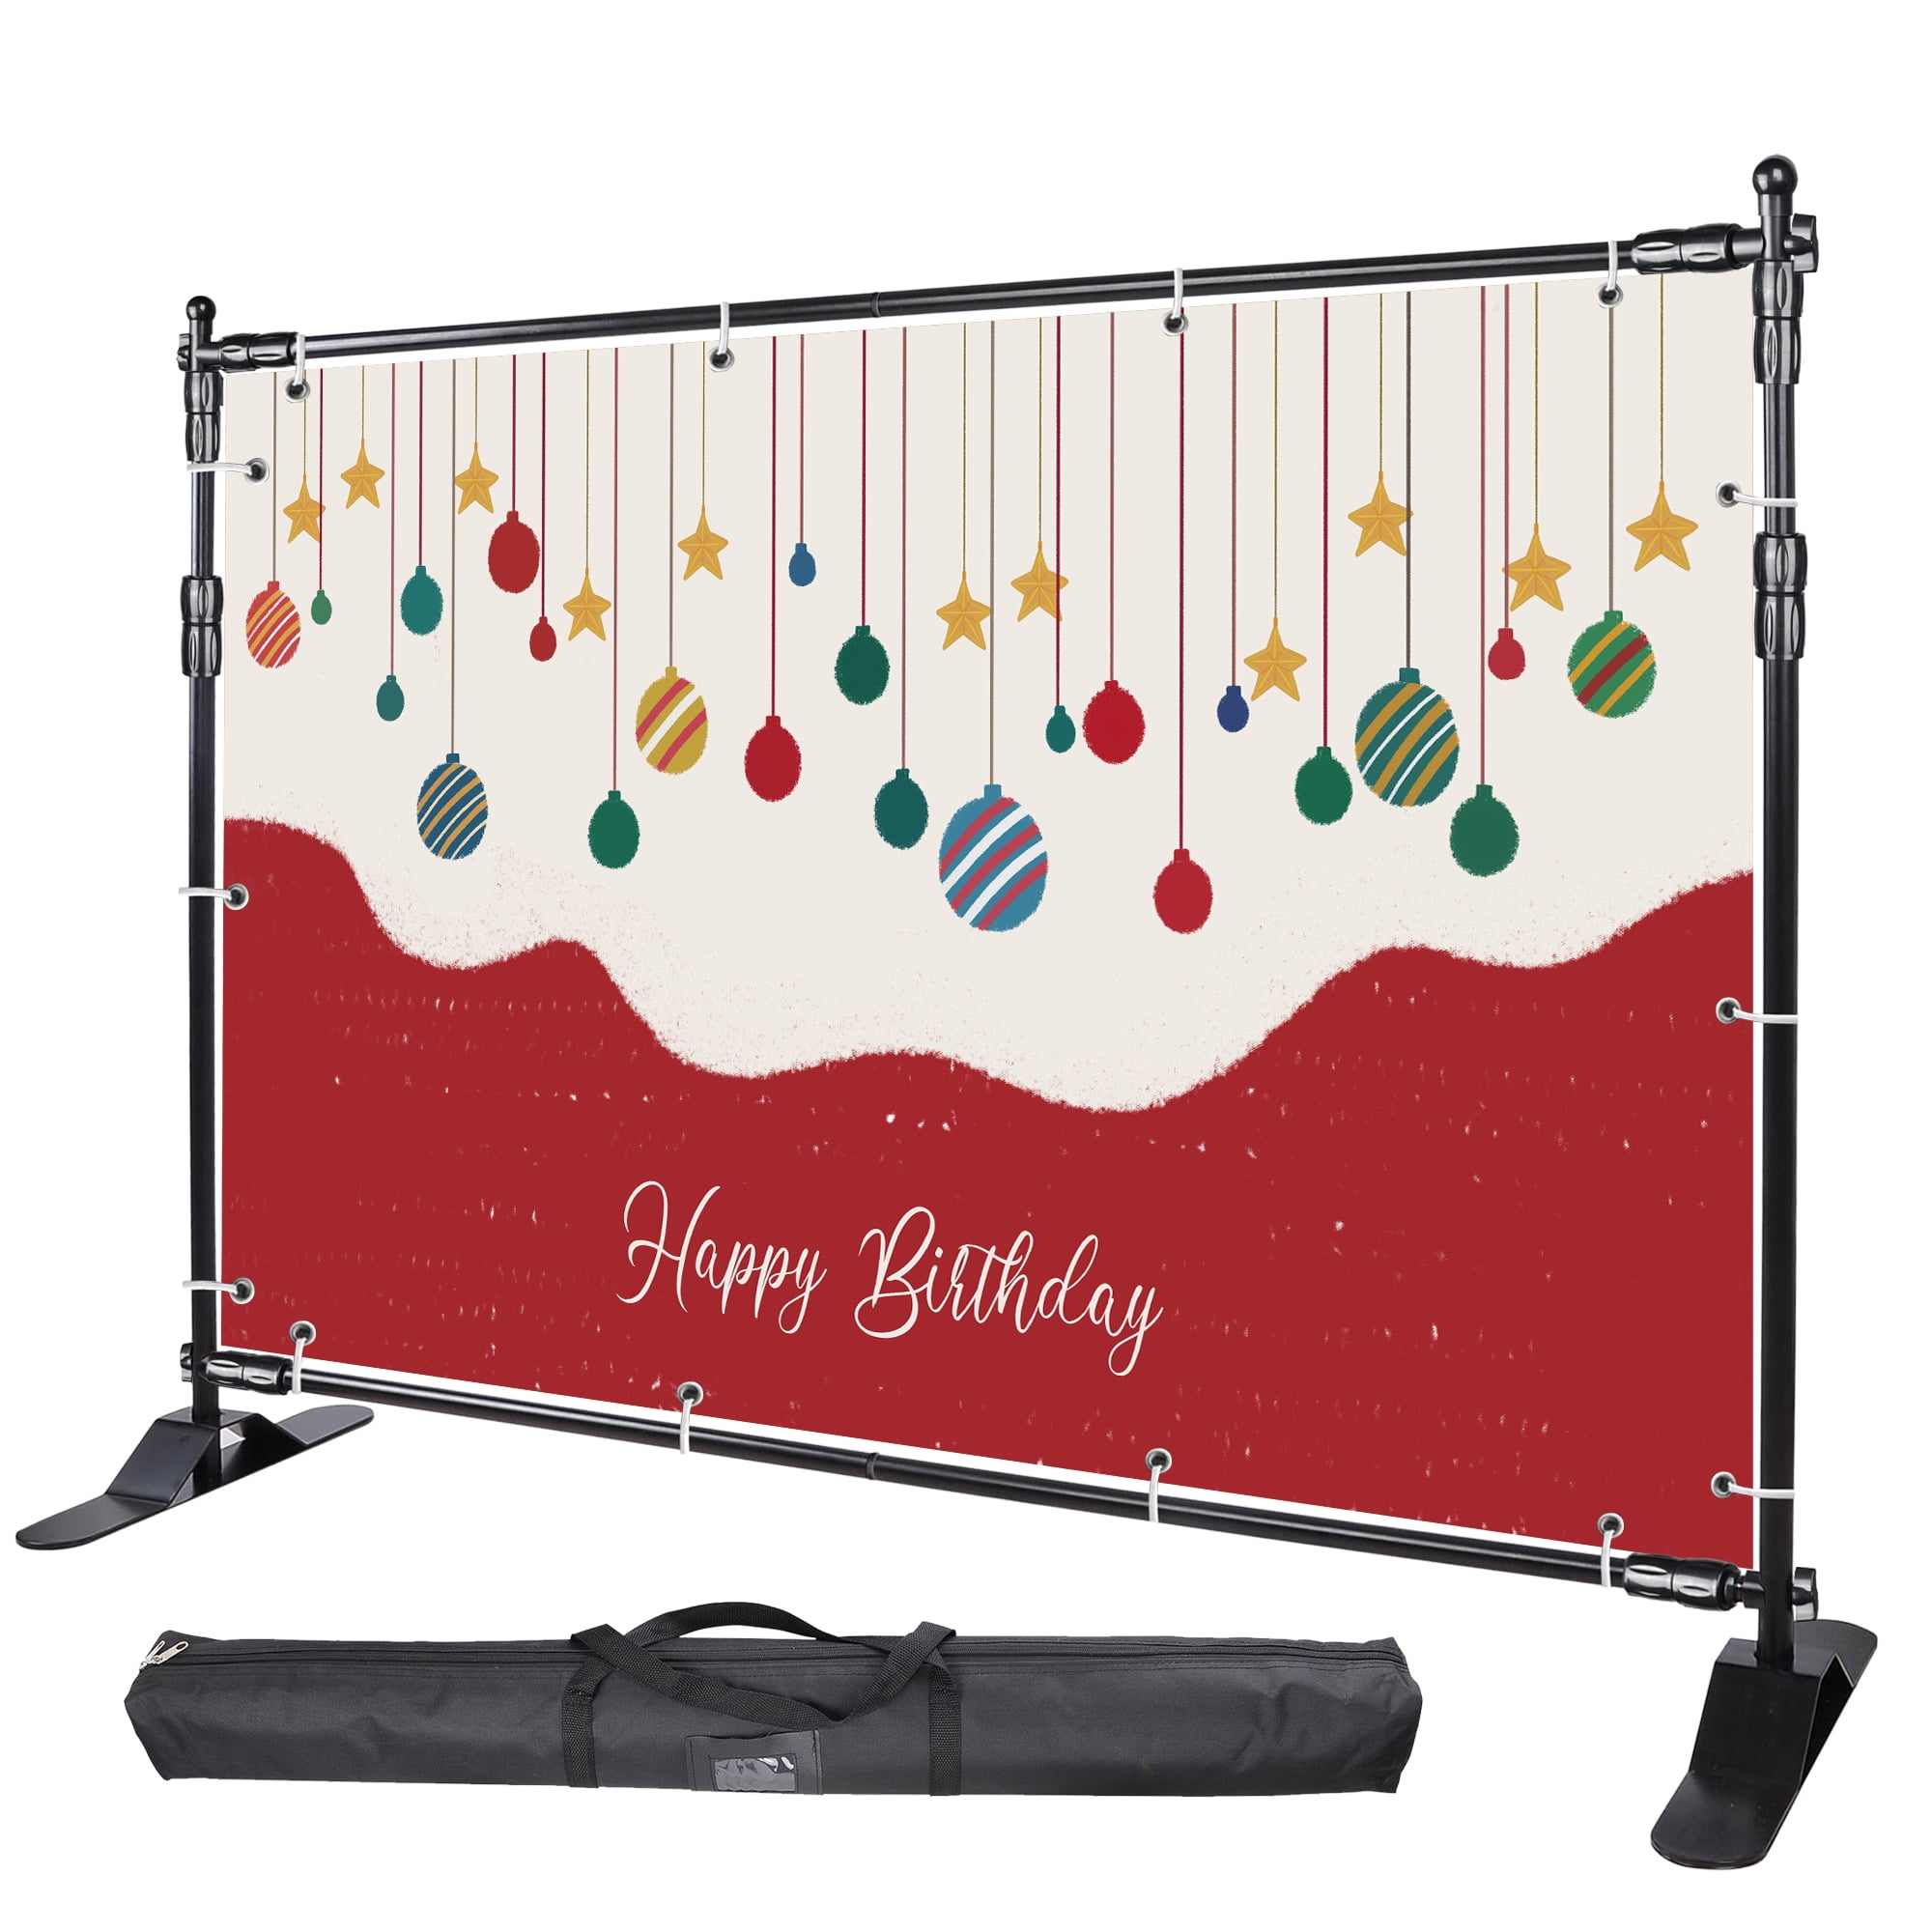 10 'x 8' Backdrop stand Telescopic for Trade Show Exhibitor photo booth 